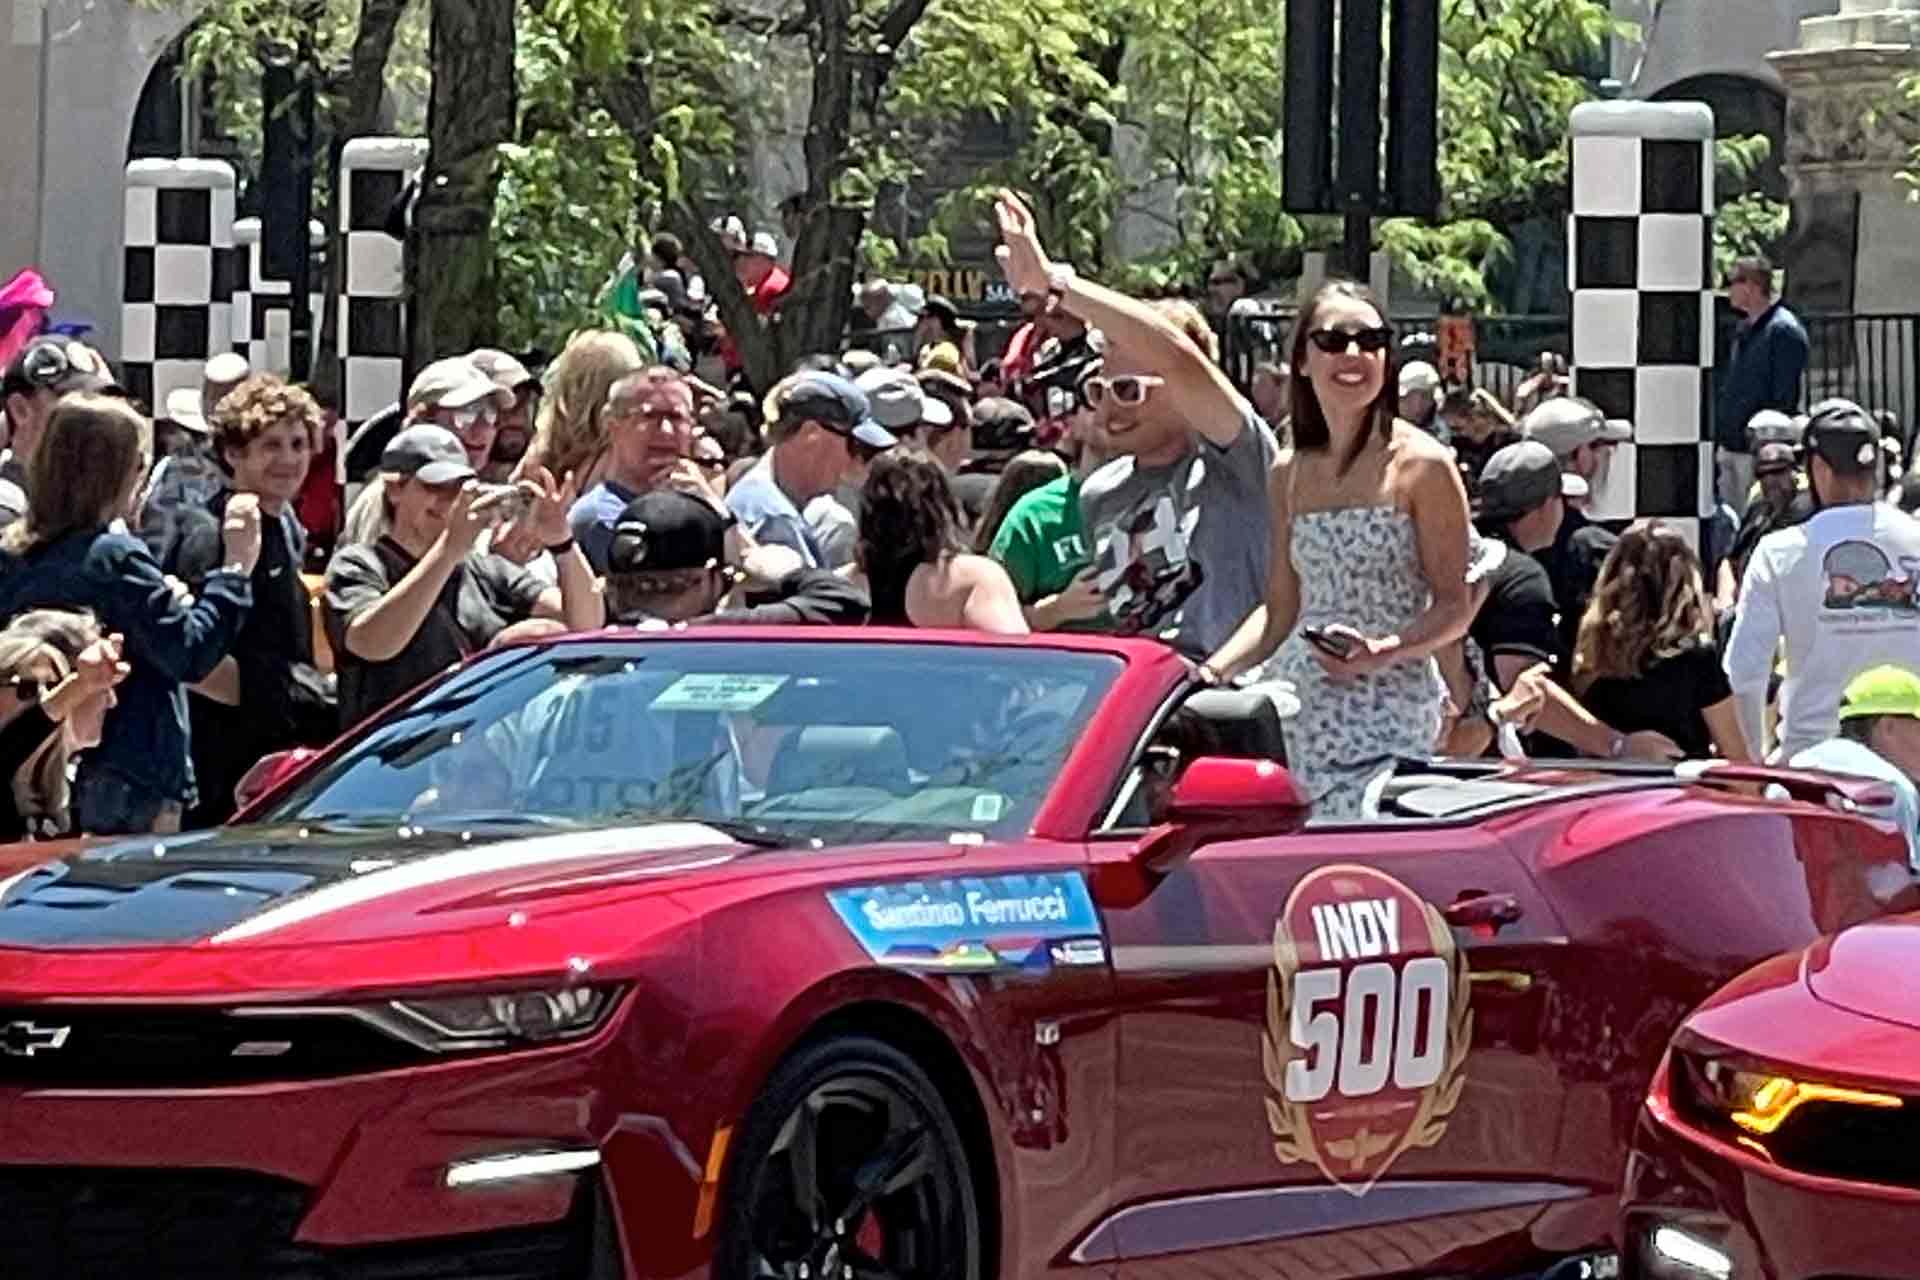 Ferrucci waving to the crowd from a red car at IndyCar events.